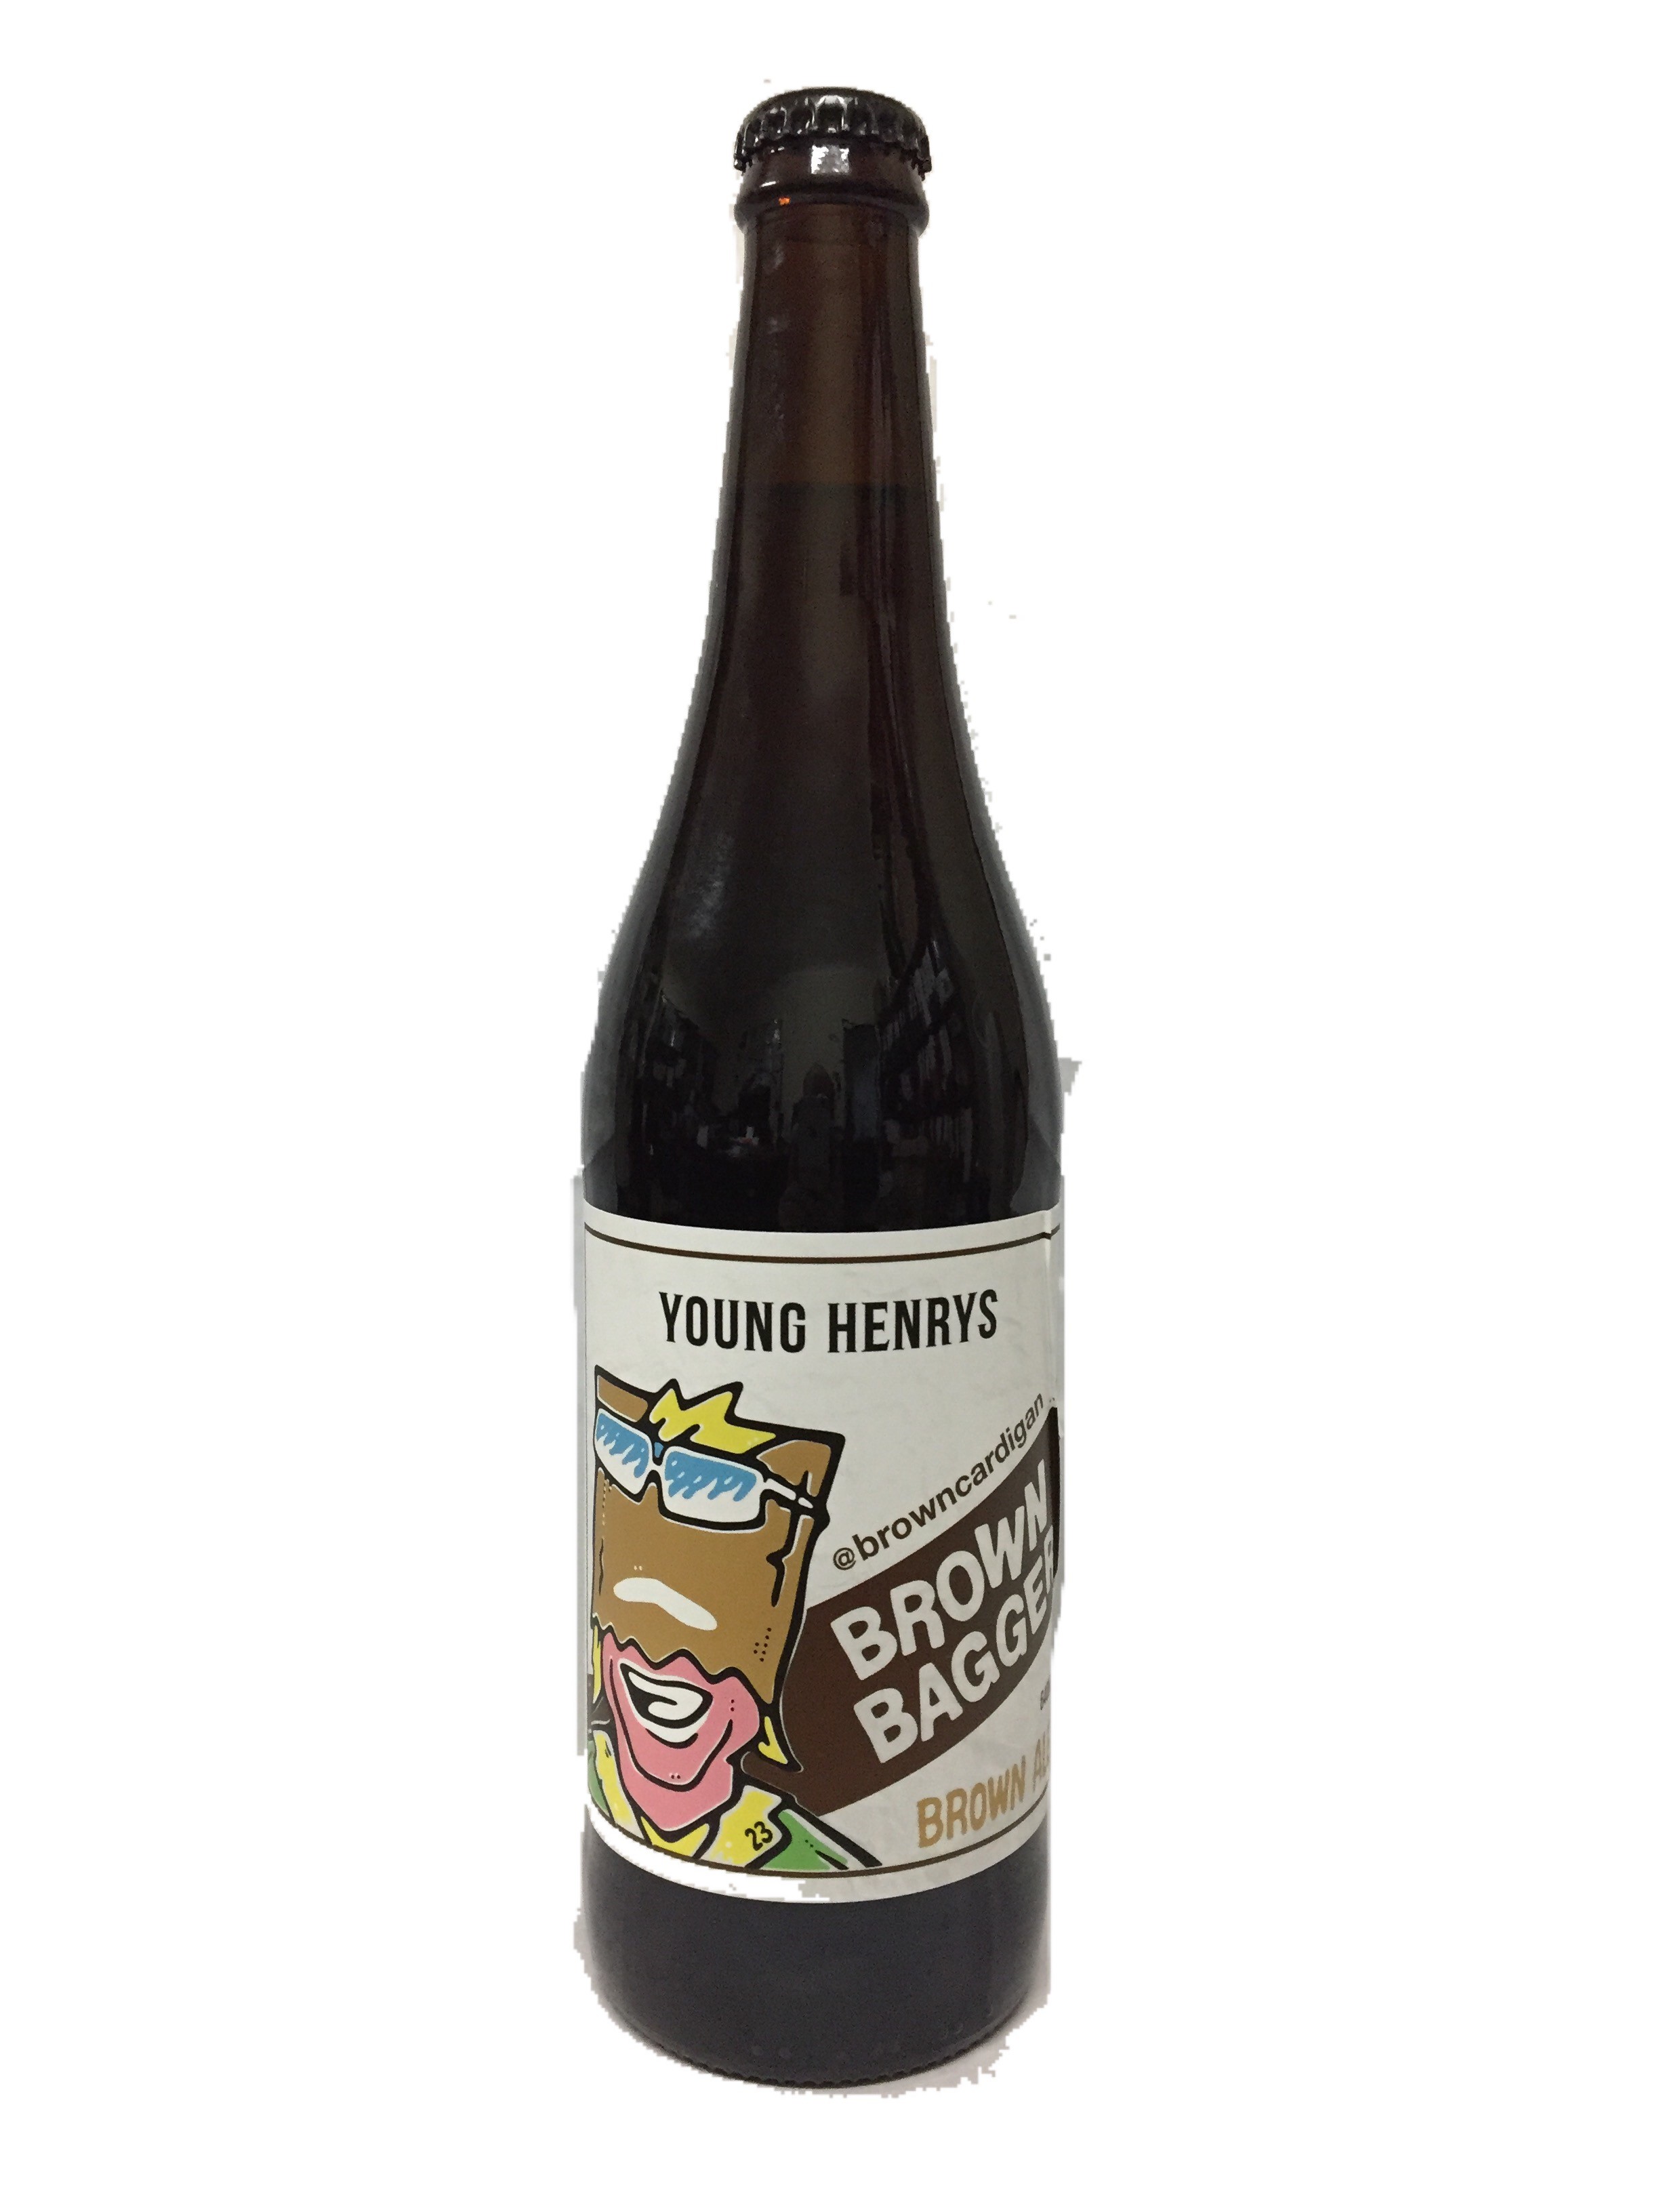 Young Henrys Brown Bagger